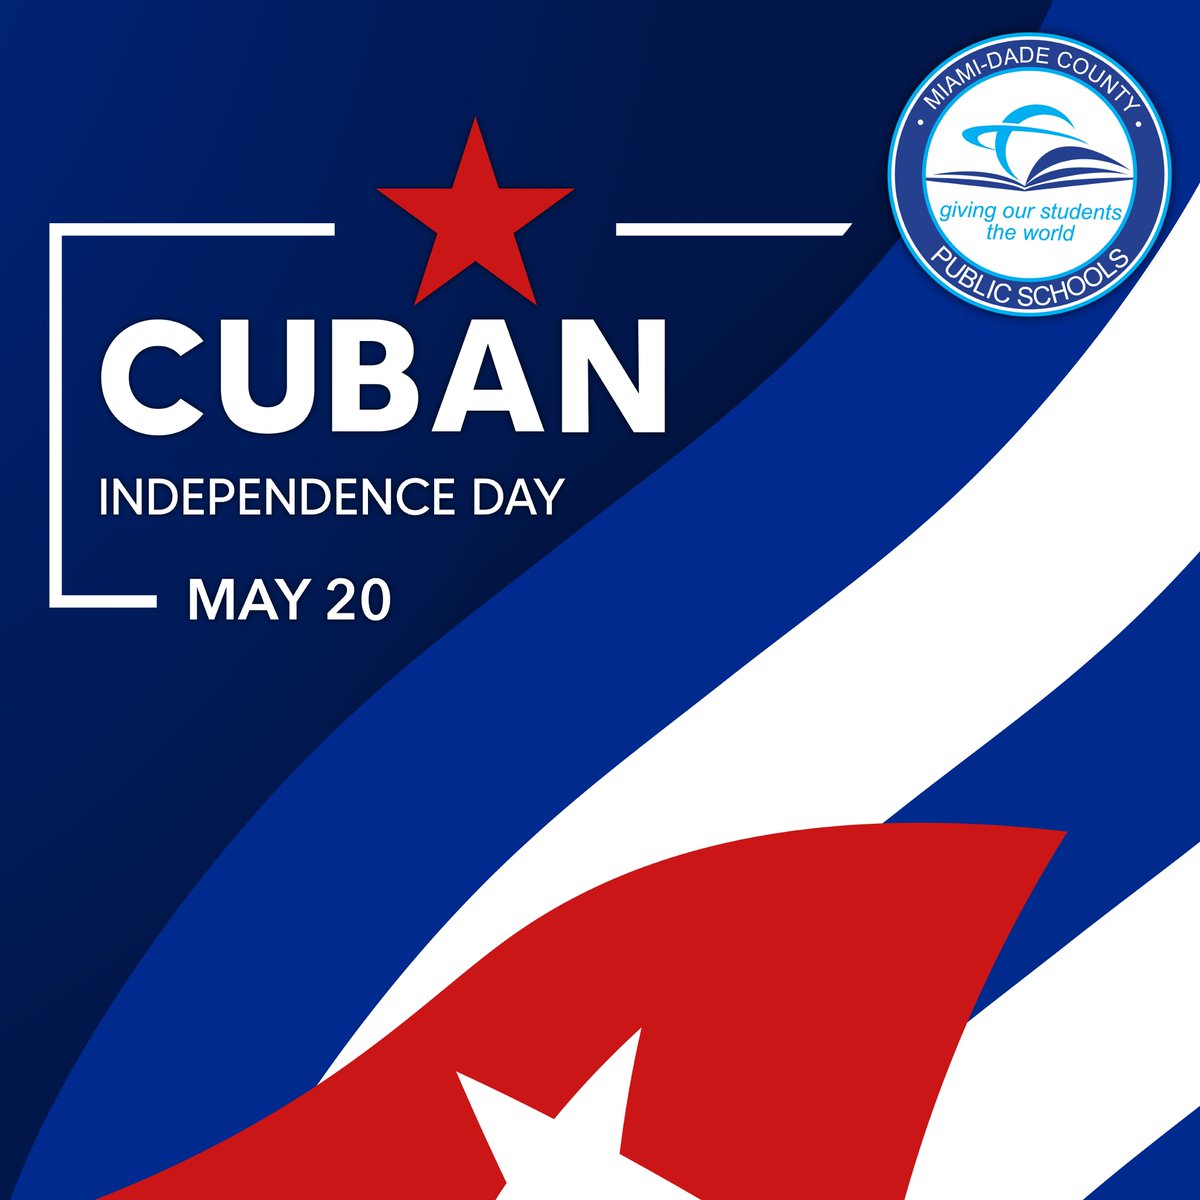 Today, we celebrate the rich heritage, vibrant culture, and enduring spirit of the Cuban community on #CubanIndependenceDay! At @MDCPS, we honor the contributions of our Cuban students, families, and educators who enrich our community with their traditions, stories, and passion